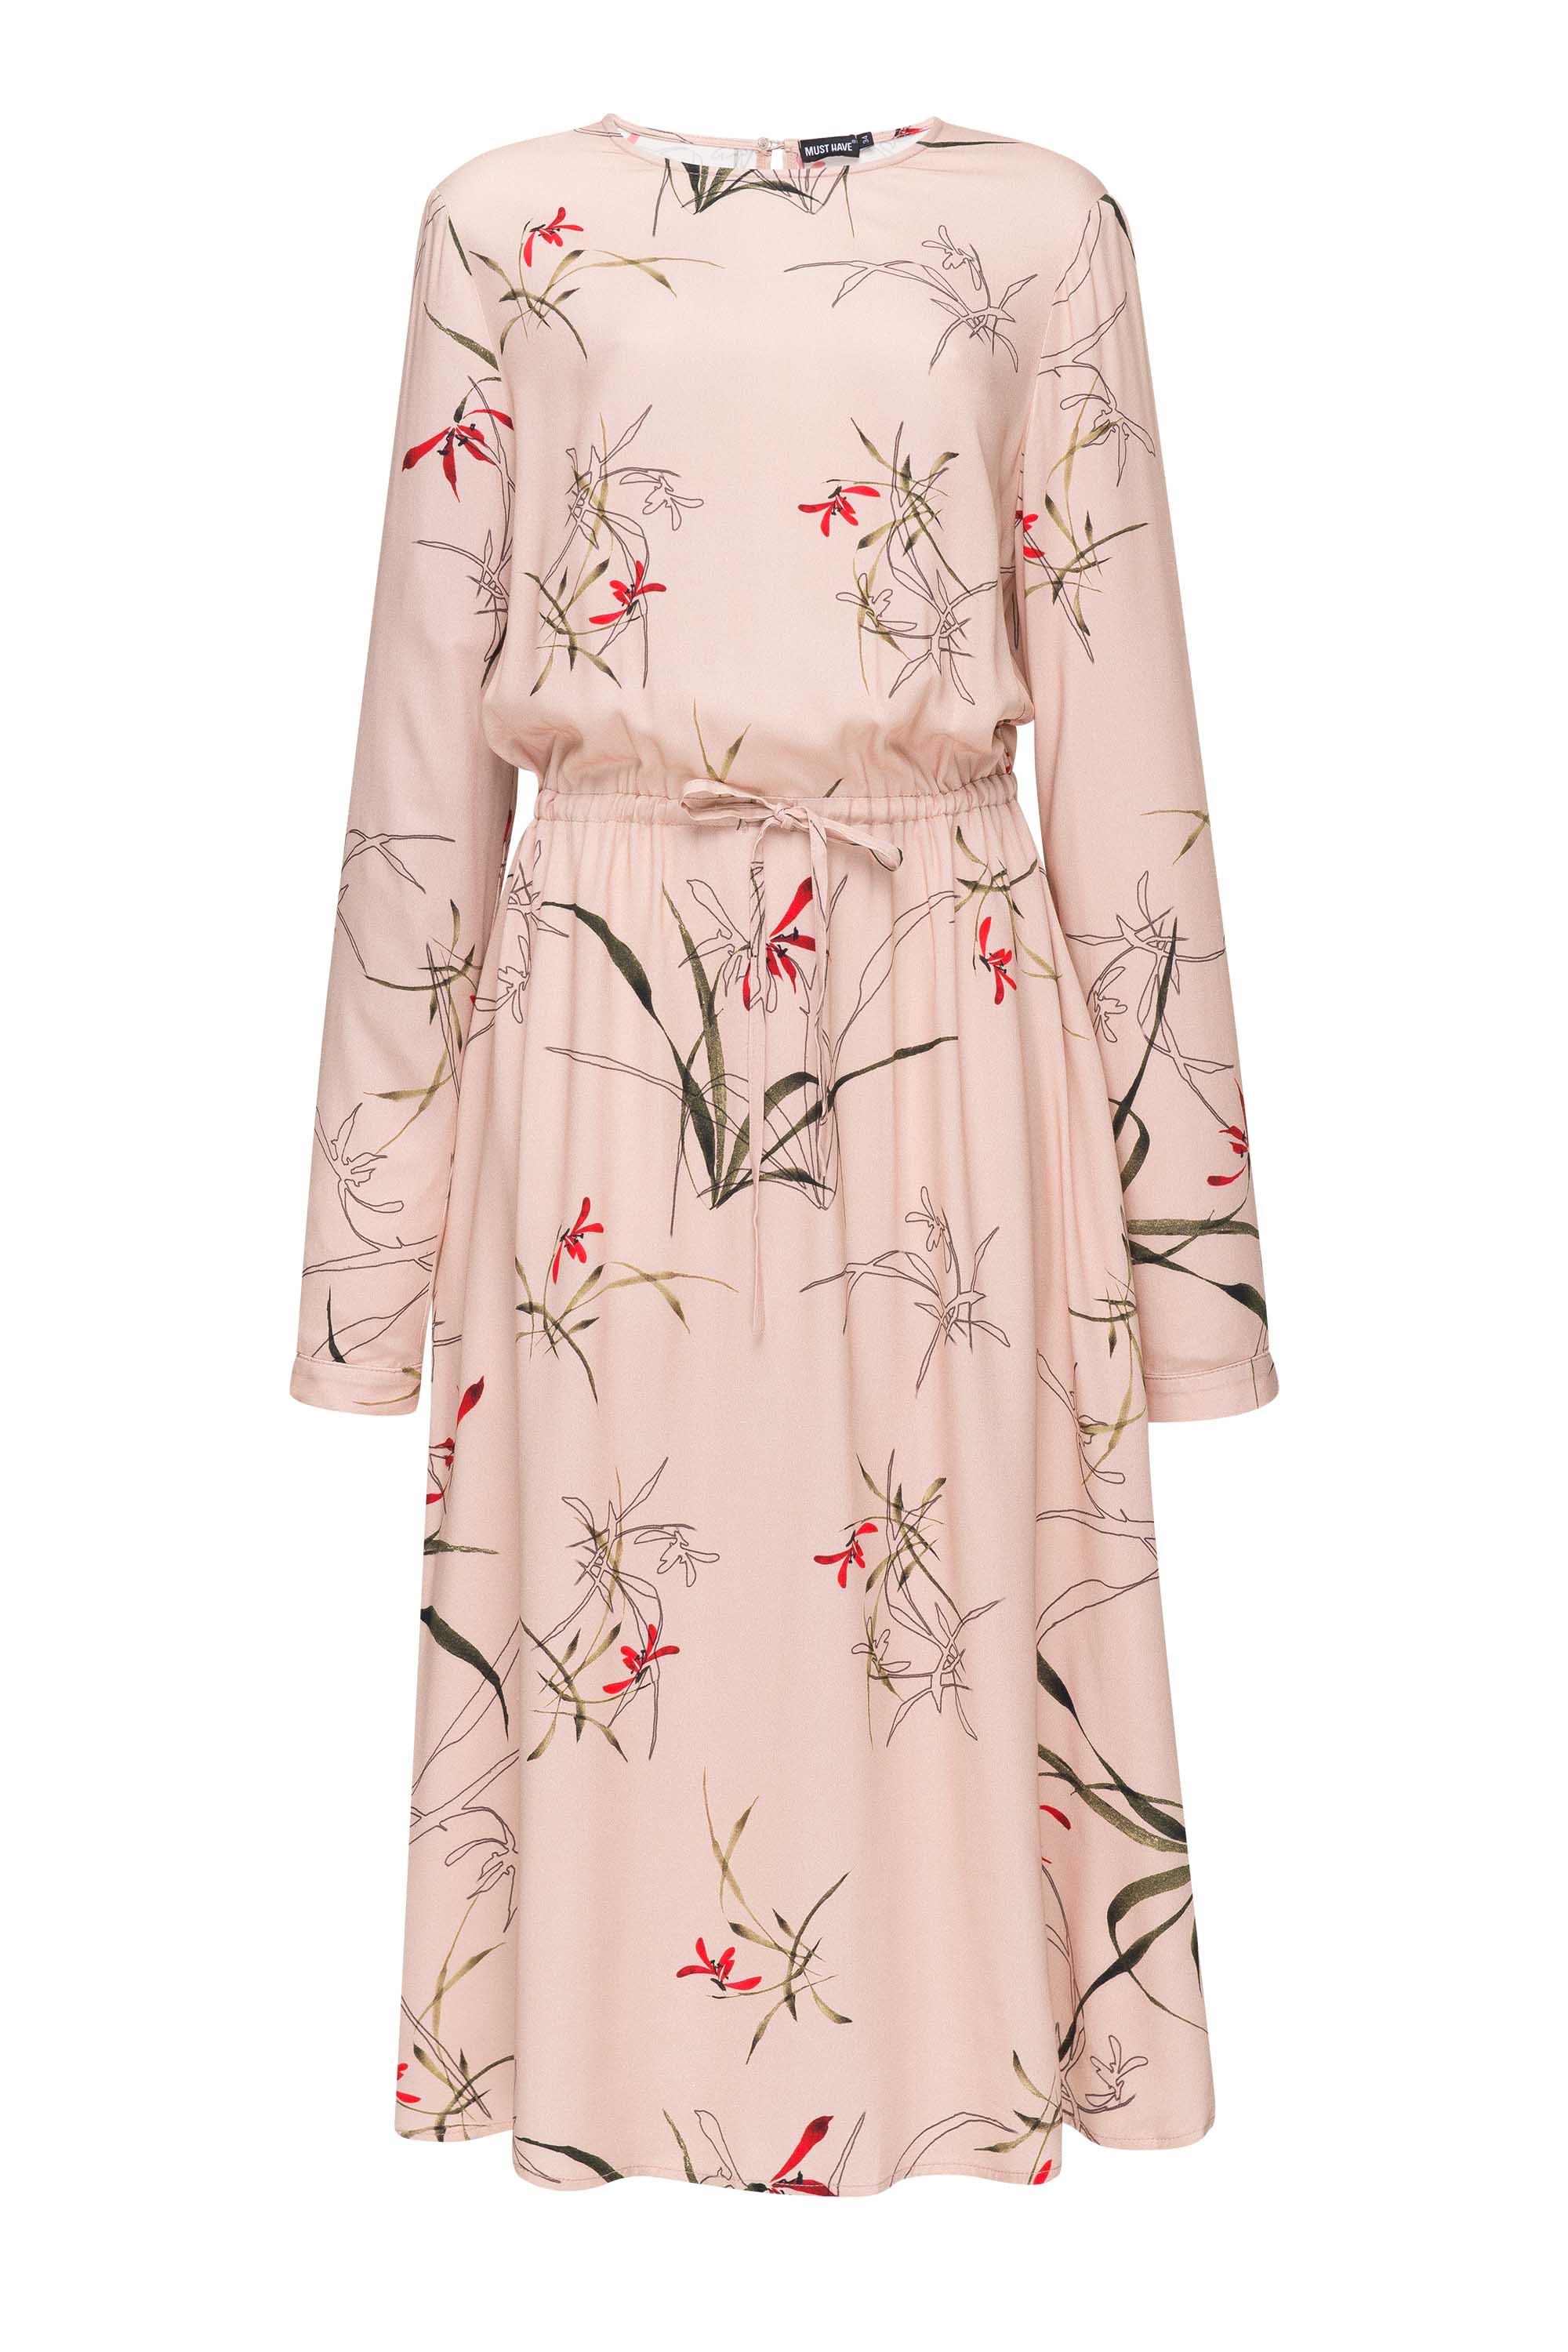 Beige dress with a floral print and ties, photo 8